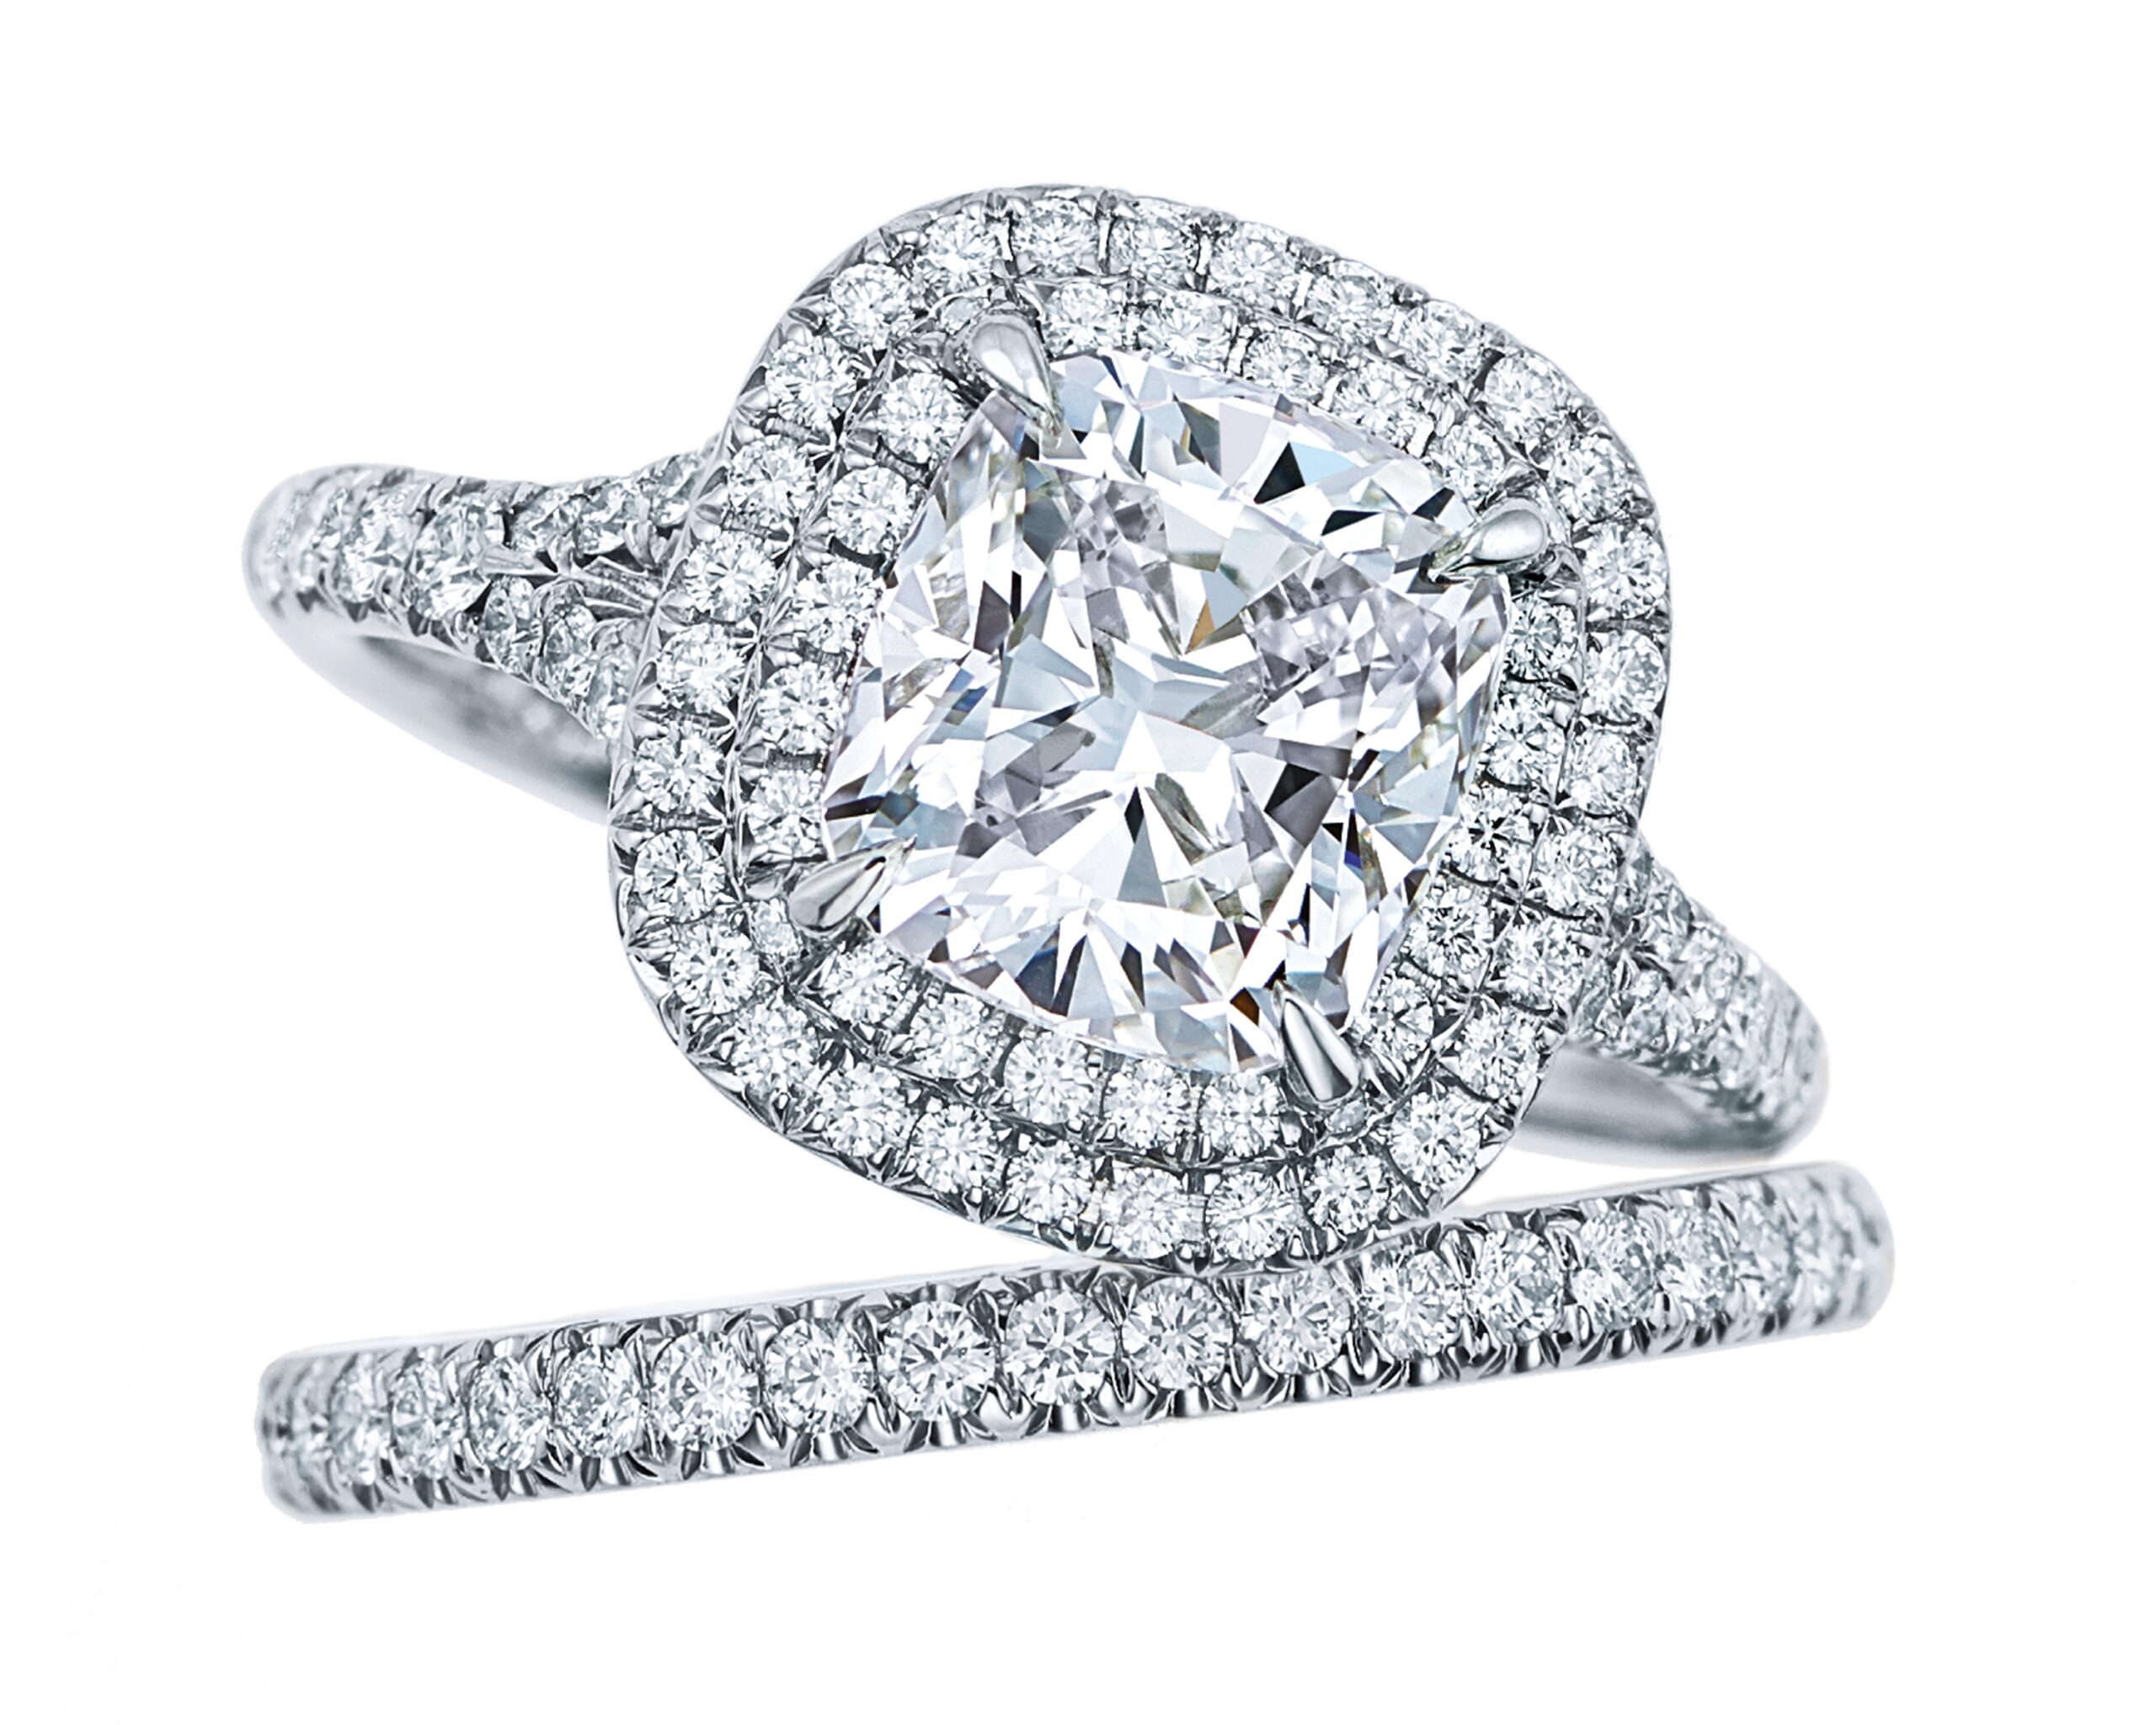 Tiffany Soleste® engagement ring and matching band in platinum